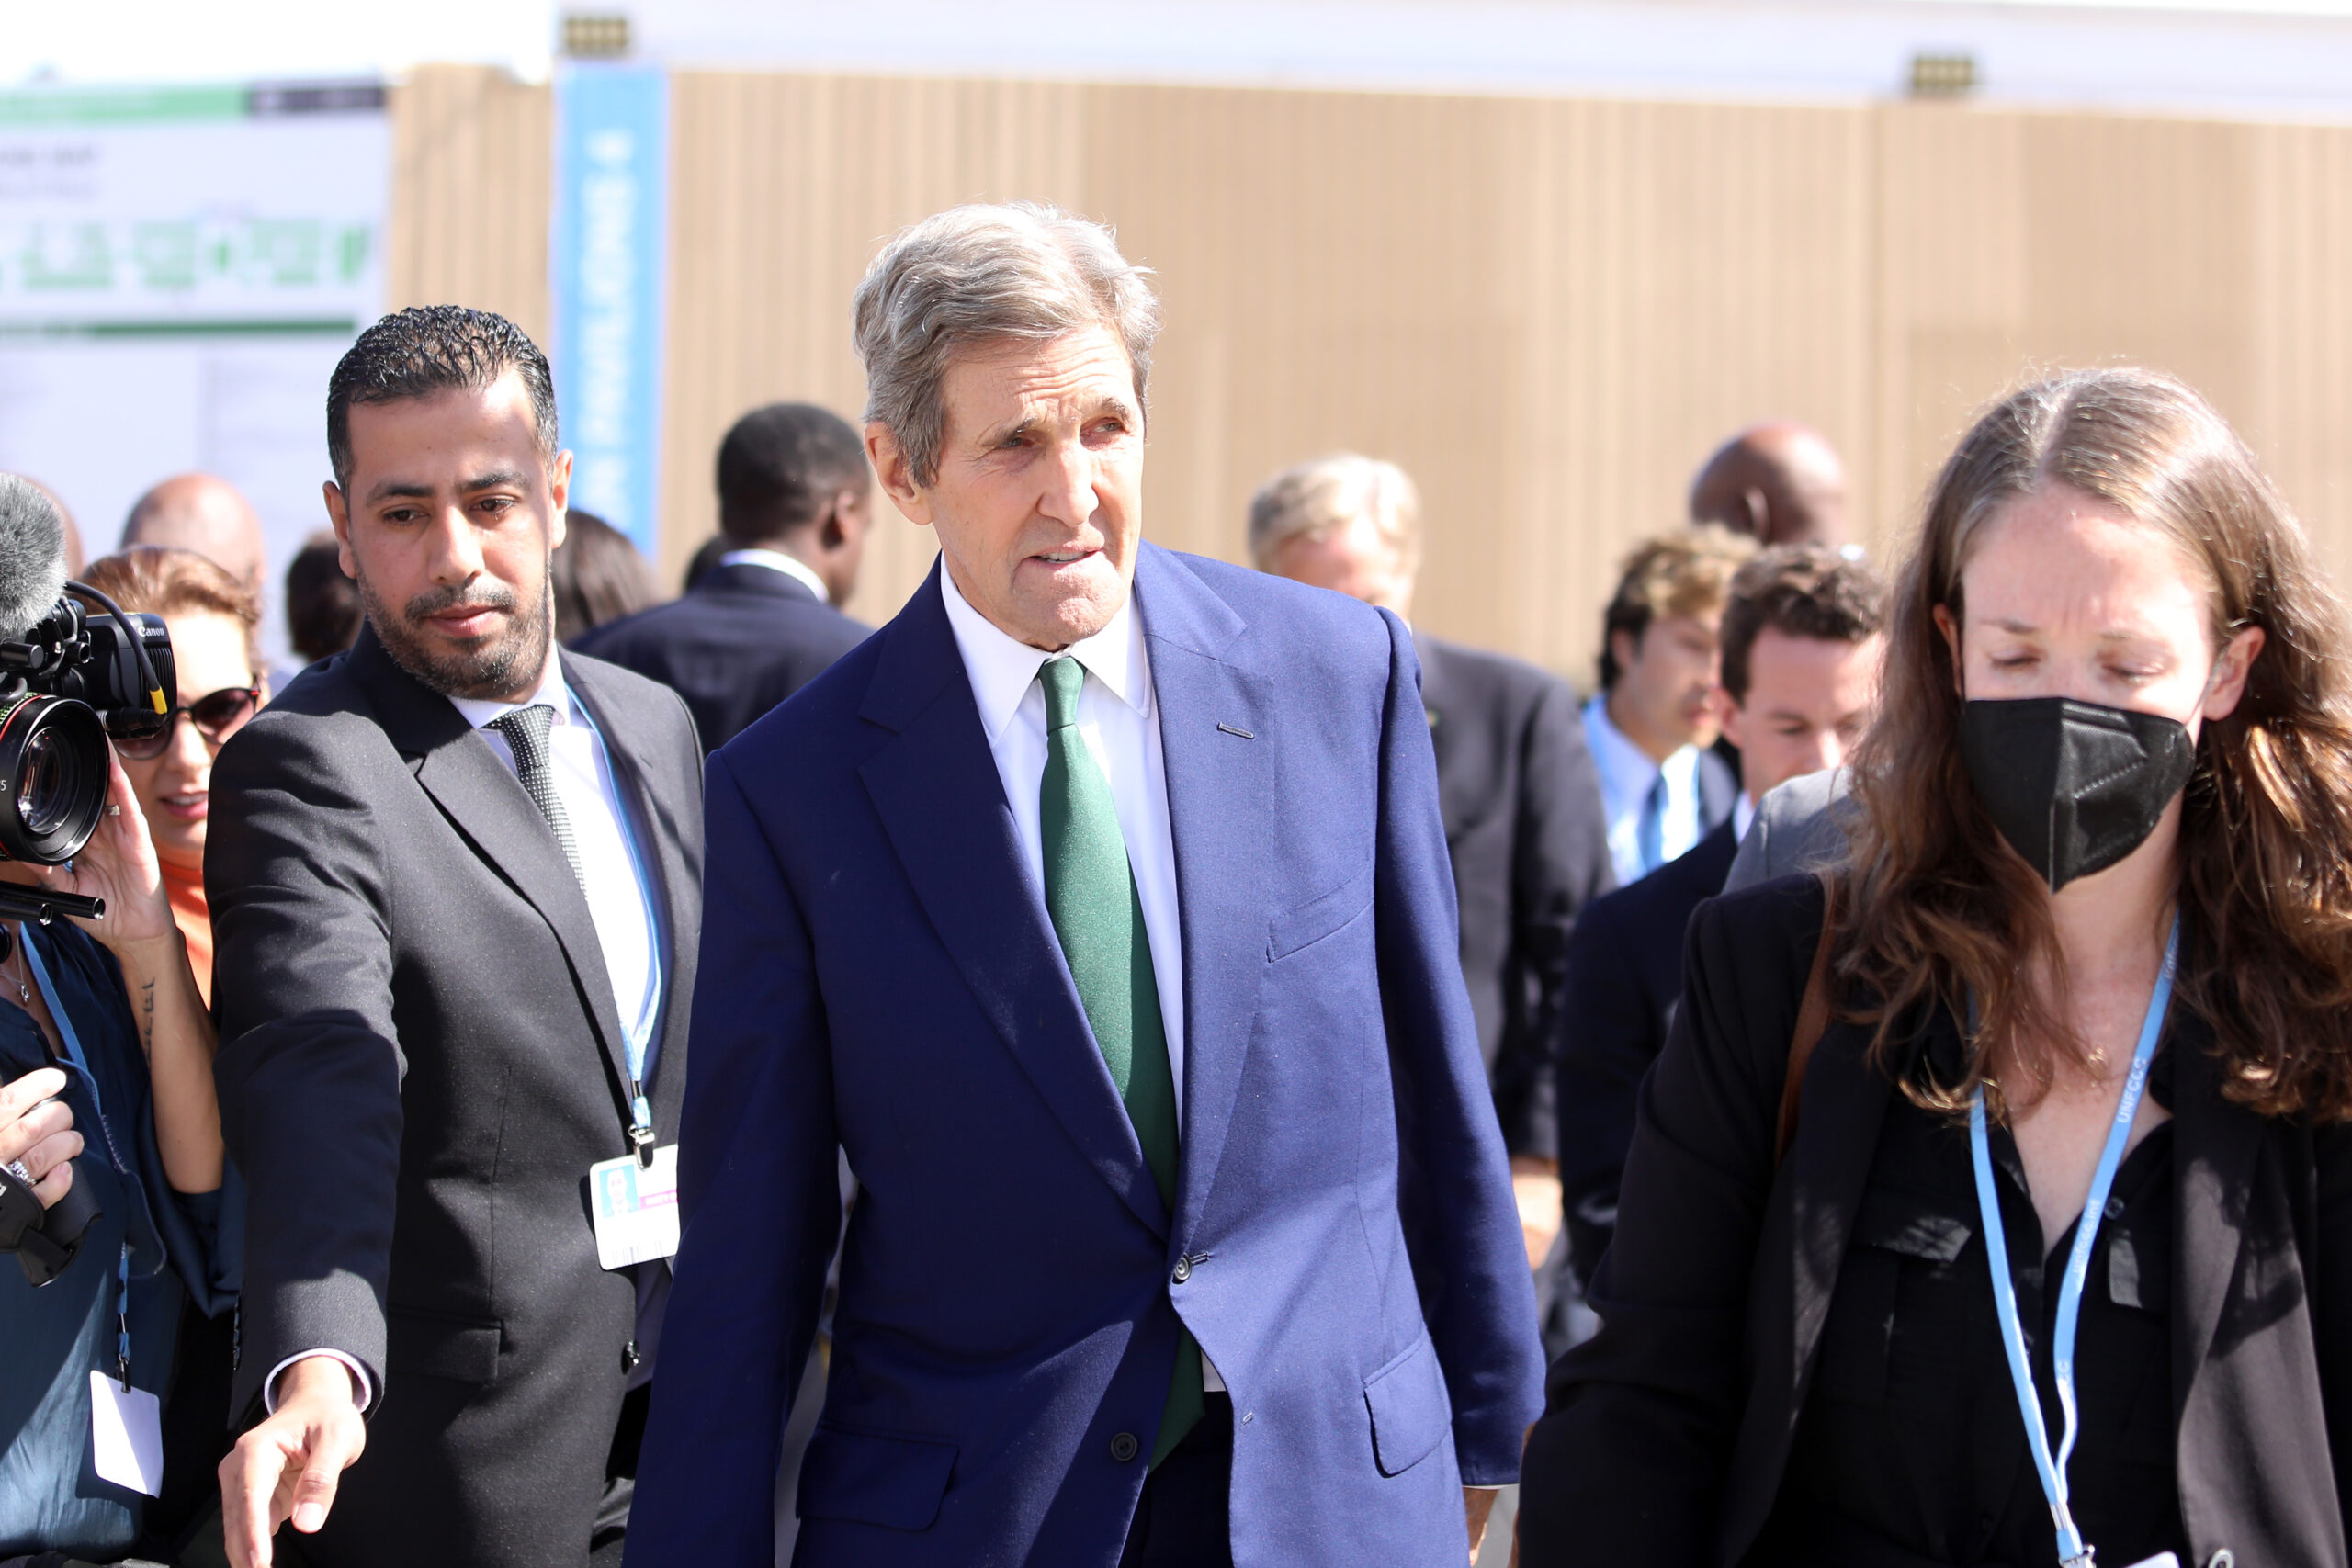 United States Special Presidential Envoy for Climate John Kerry (C) is being welcomed by officials upon his arrival to attend the 2022 United Nations Climate Change Conference (COP27) at the Sharm El Sheikhon November 08, 2022 [Mohamed Abdel Hamid/Anadolu Agency]